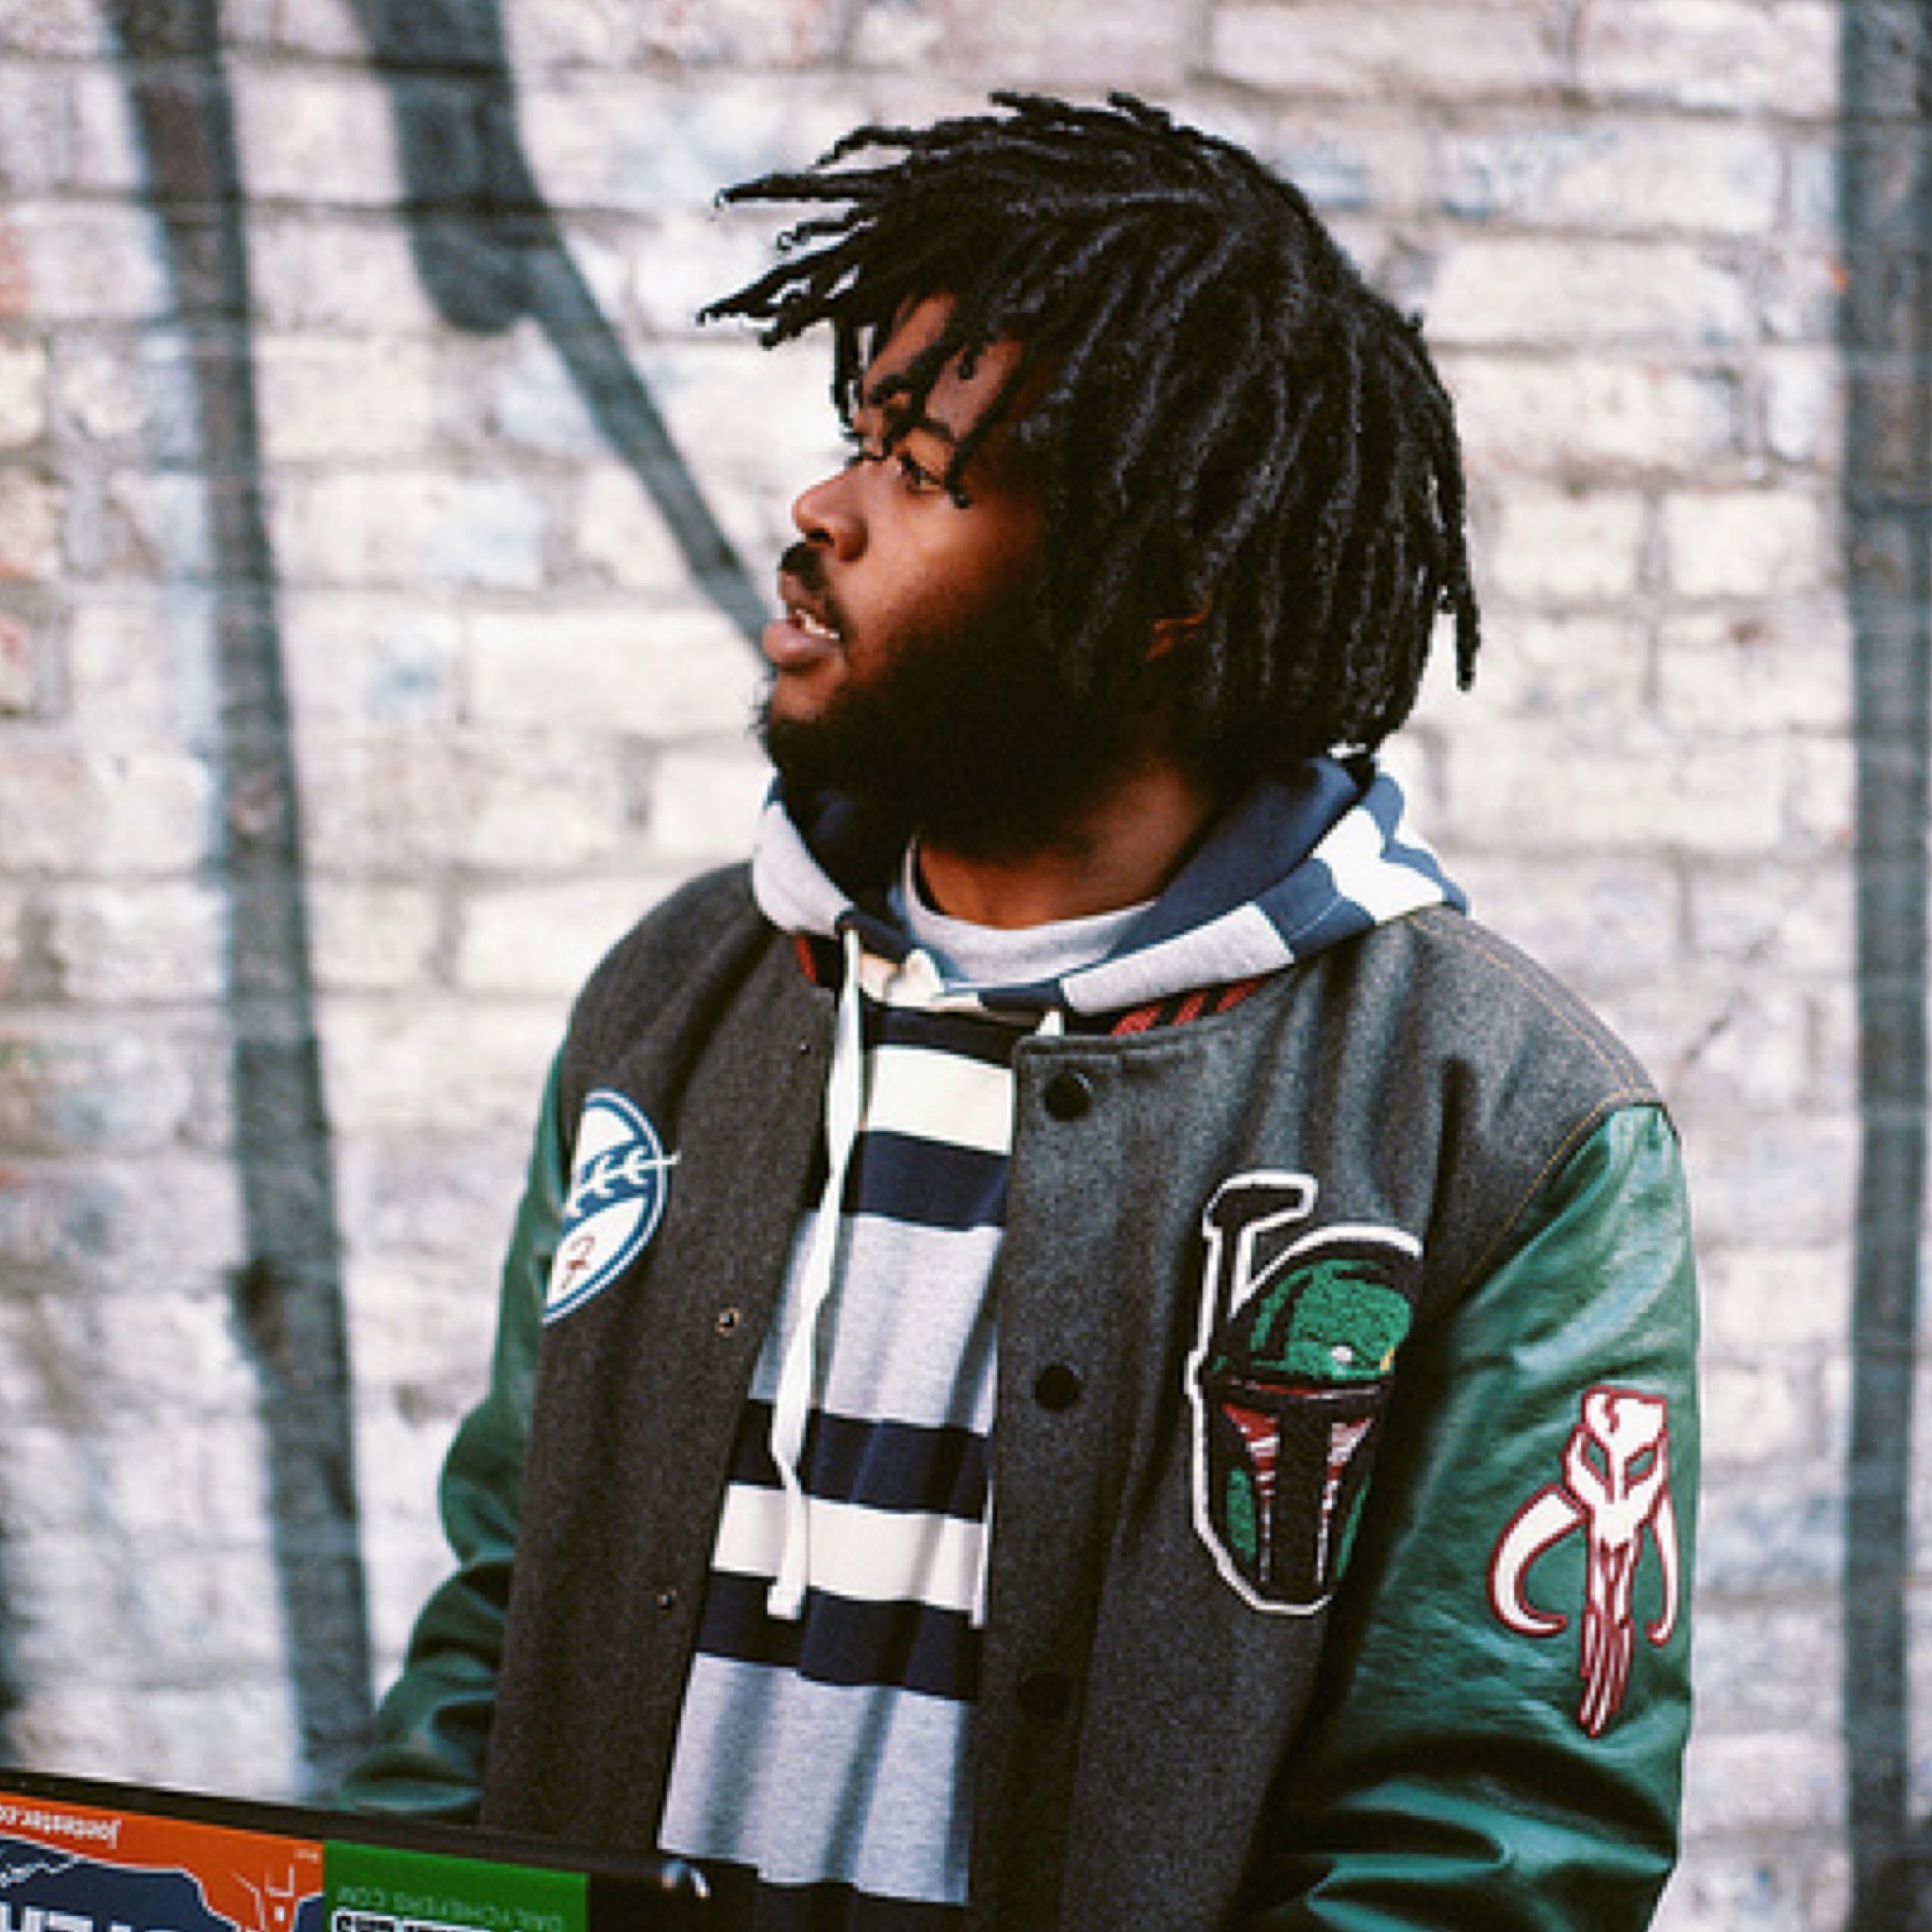 Happy Birthday, Capital Steez, and may you rest in peace   